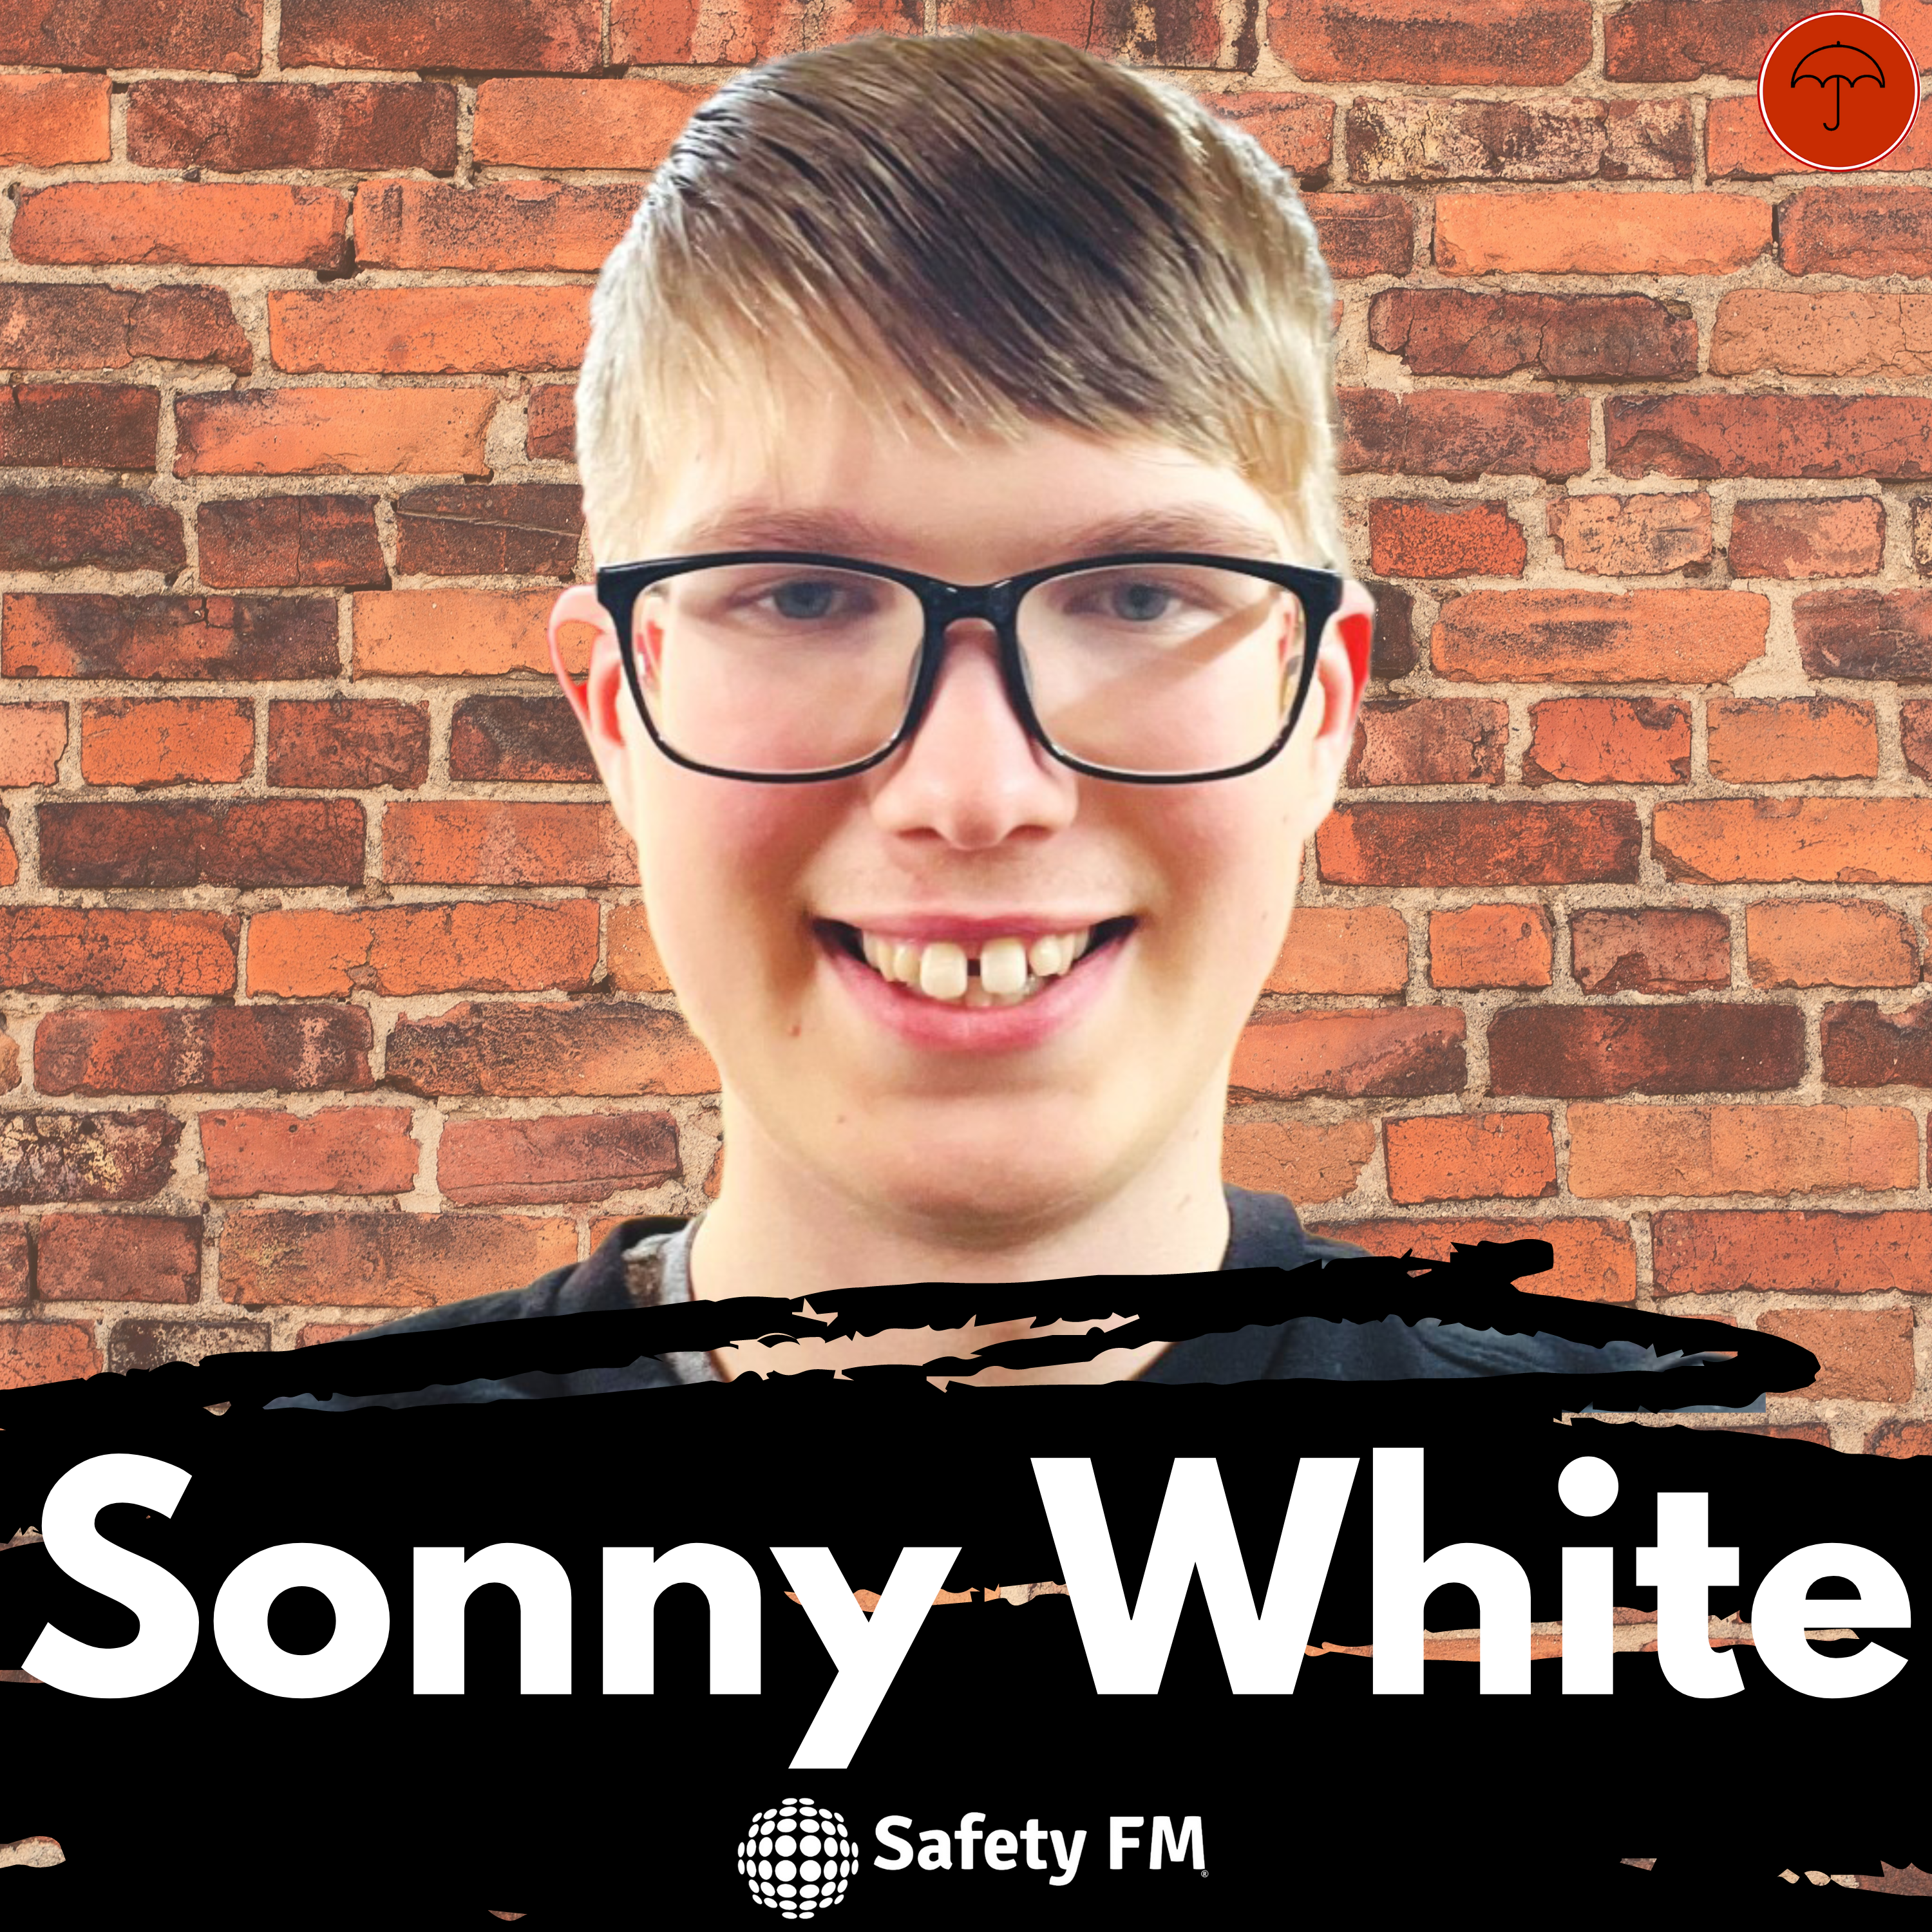 Rebranding Safety with Sonny White - The journey to publishing industry guidance on 